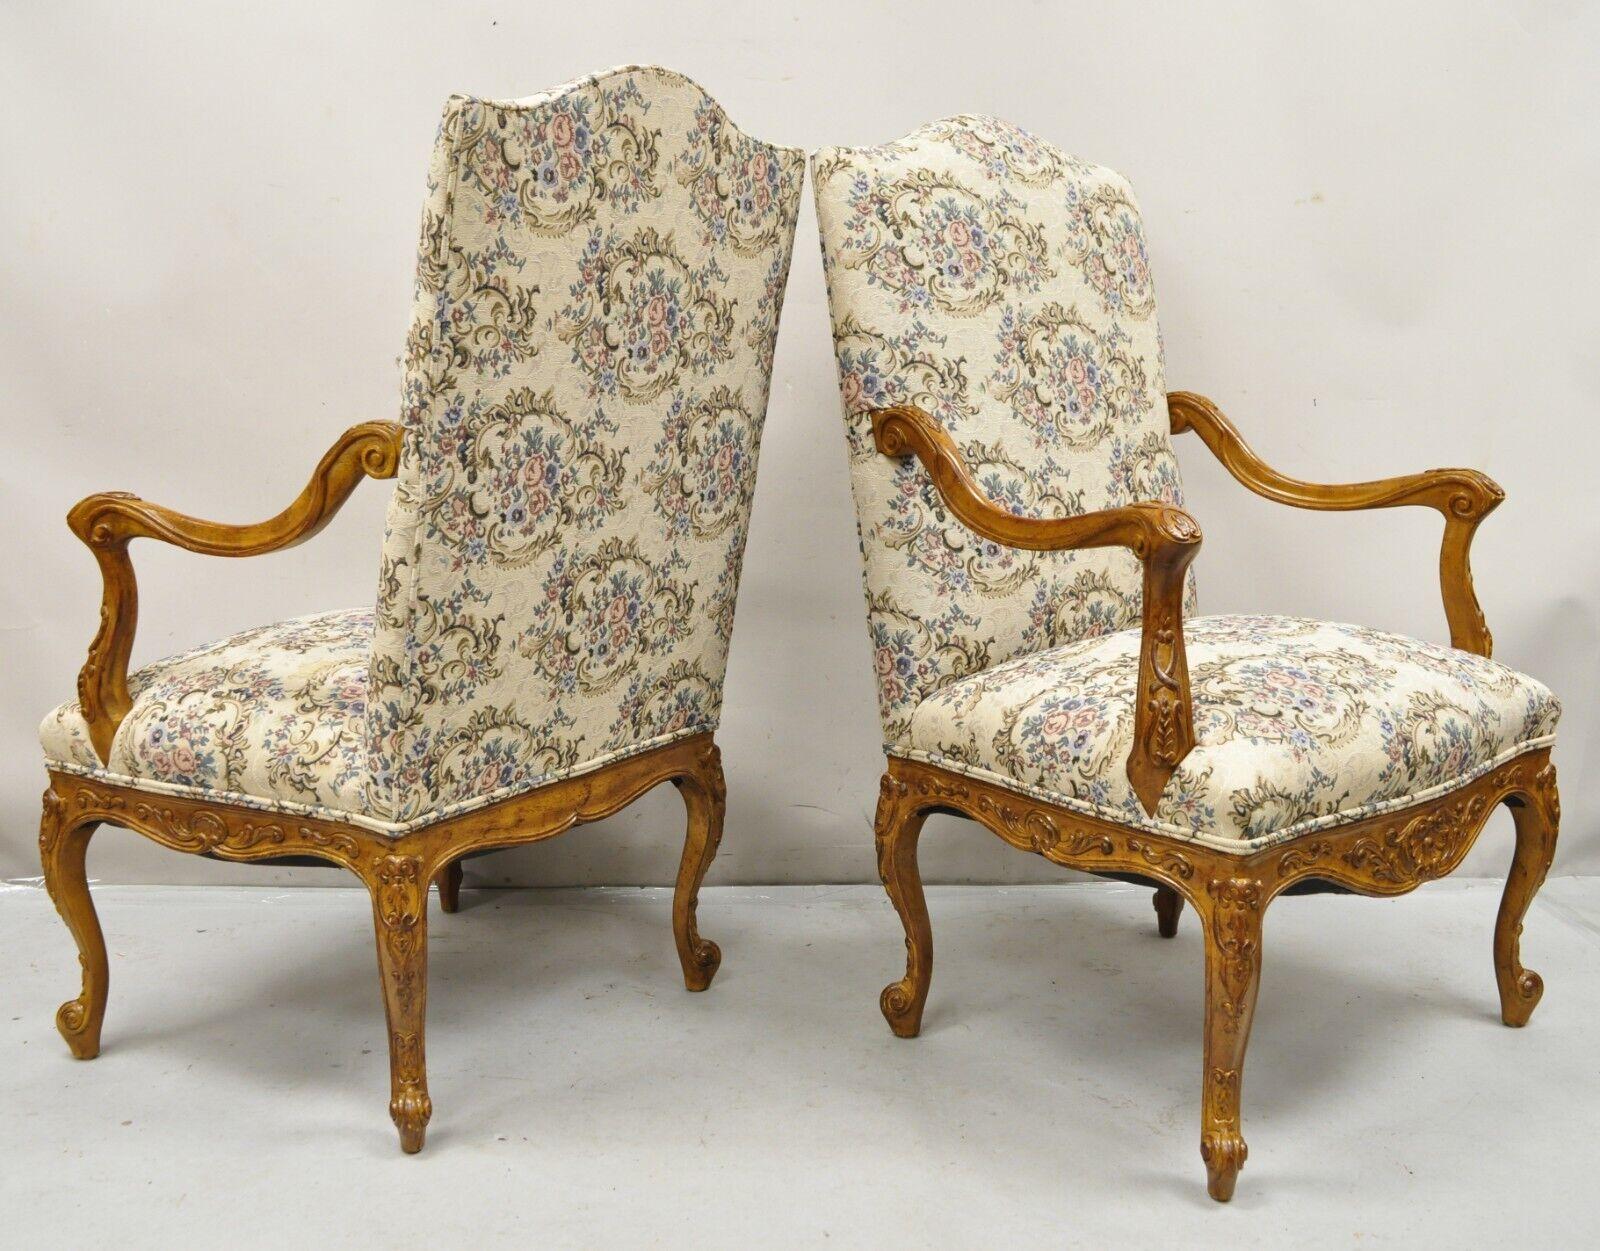 Pair French Country Style Carved Walnut Floral Upholstered High Back Arm Chairs. Item features a solid wood frame, fully upholstered back and seat, distressed finish, nicely carved details, quality craftsmanship, great style and form. Circa Late